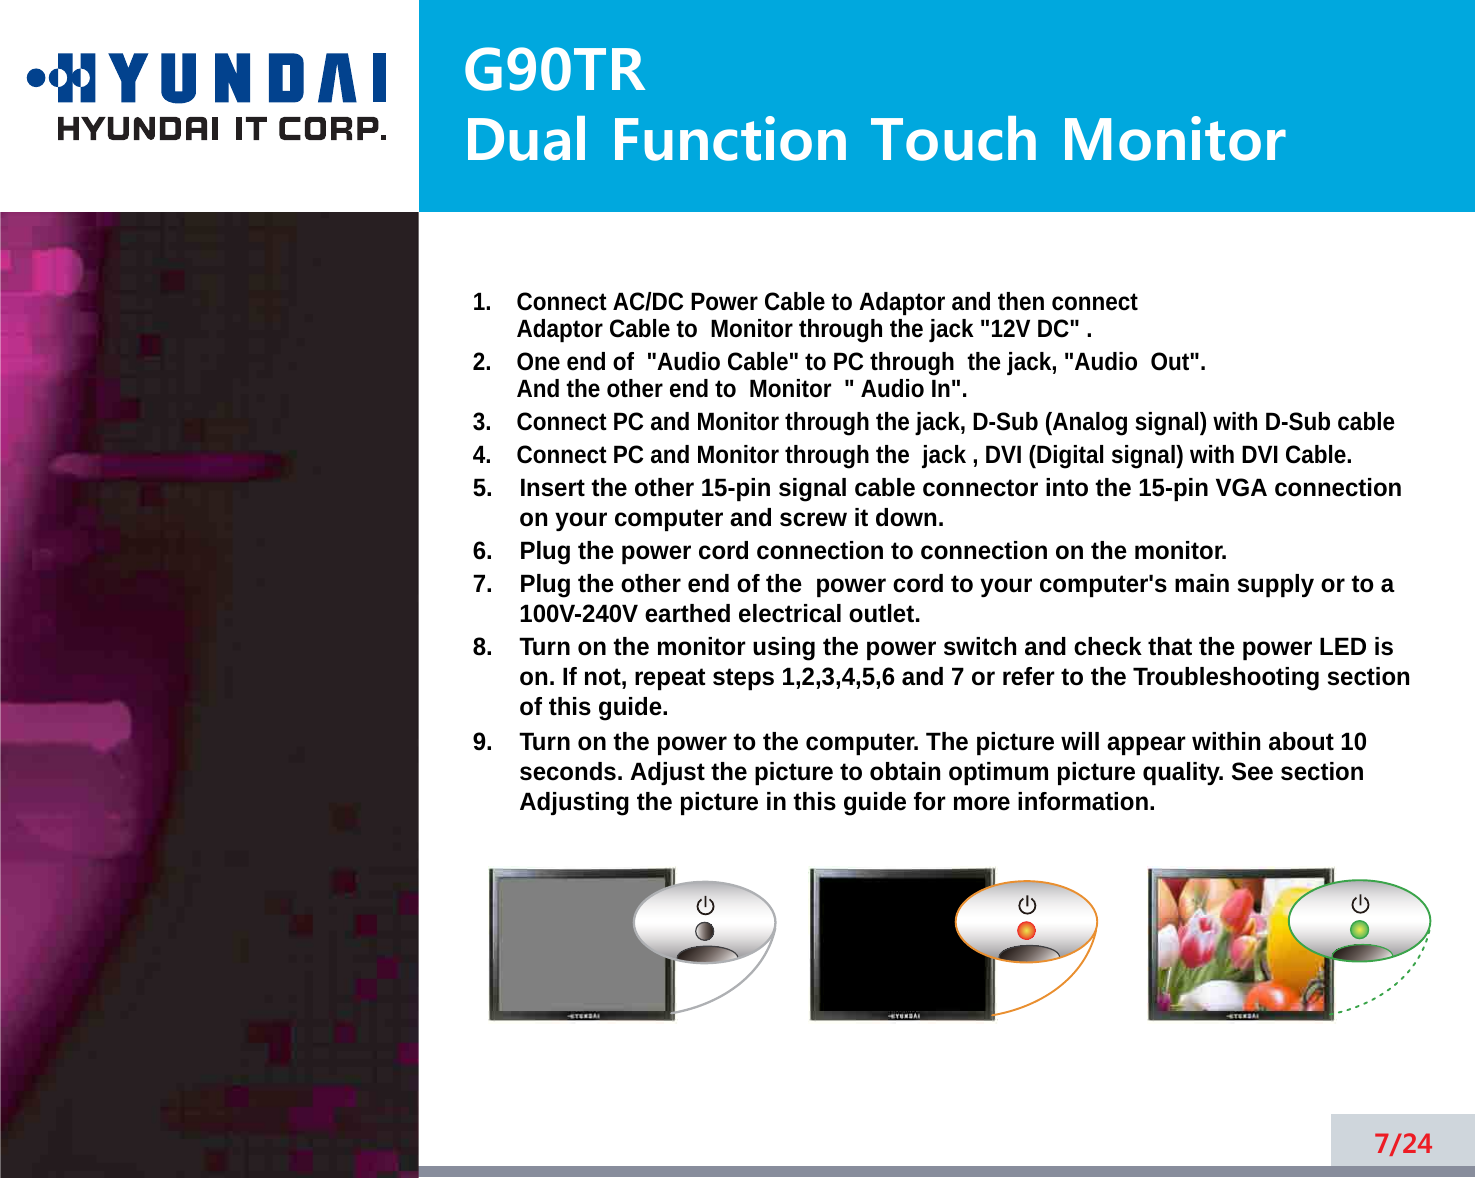 G90TRDual Function Touch Monitor5.    Insert the other 15-pin signal cable connector into the 15-pin VGA connectionon your computer and screw it down. 6.    Plug the power cord connection to connection on the monitor.7.    Plug the other end of the  power cord to your computer&apos;s main supply or to a100V-240V earthed electrical outlet.8.    Turn on the monitor using the power switch and check that the power LED ison. If not, repeat steps 1,2,3,4,5,6 and 7 or refer to the Troubleshooting sectionof this guide.9.    Turn on the power to the computer. The picture will appear within about 10seconds. Adjust the picture to obtain optimum picture quality. See sectionAdjusting the picture in this guide for more information.7/241.    Connect AC/DC Power Cable to Adaptor and then connectAdaptor Cable to  Monitor through the jack &quot;12V DC&quot; .2.    One end of &quot;Audio Cable&quot; to PC through  the jack, &quot;Audio  Out&quot;.And the other end to  Monitor  &quot; Audio In&quot;.3.    Connect PC and Monitor through the jack, D-Sub (Analog signal) with D-Sub cable4.    Connect PC and Monitor through the  jack , DVI (Digital signal) with DVI Cable.